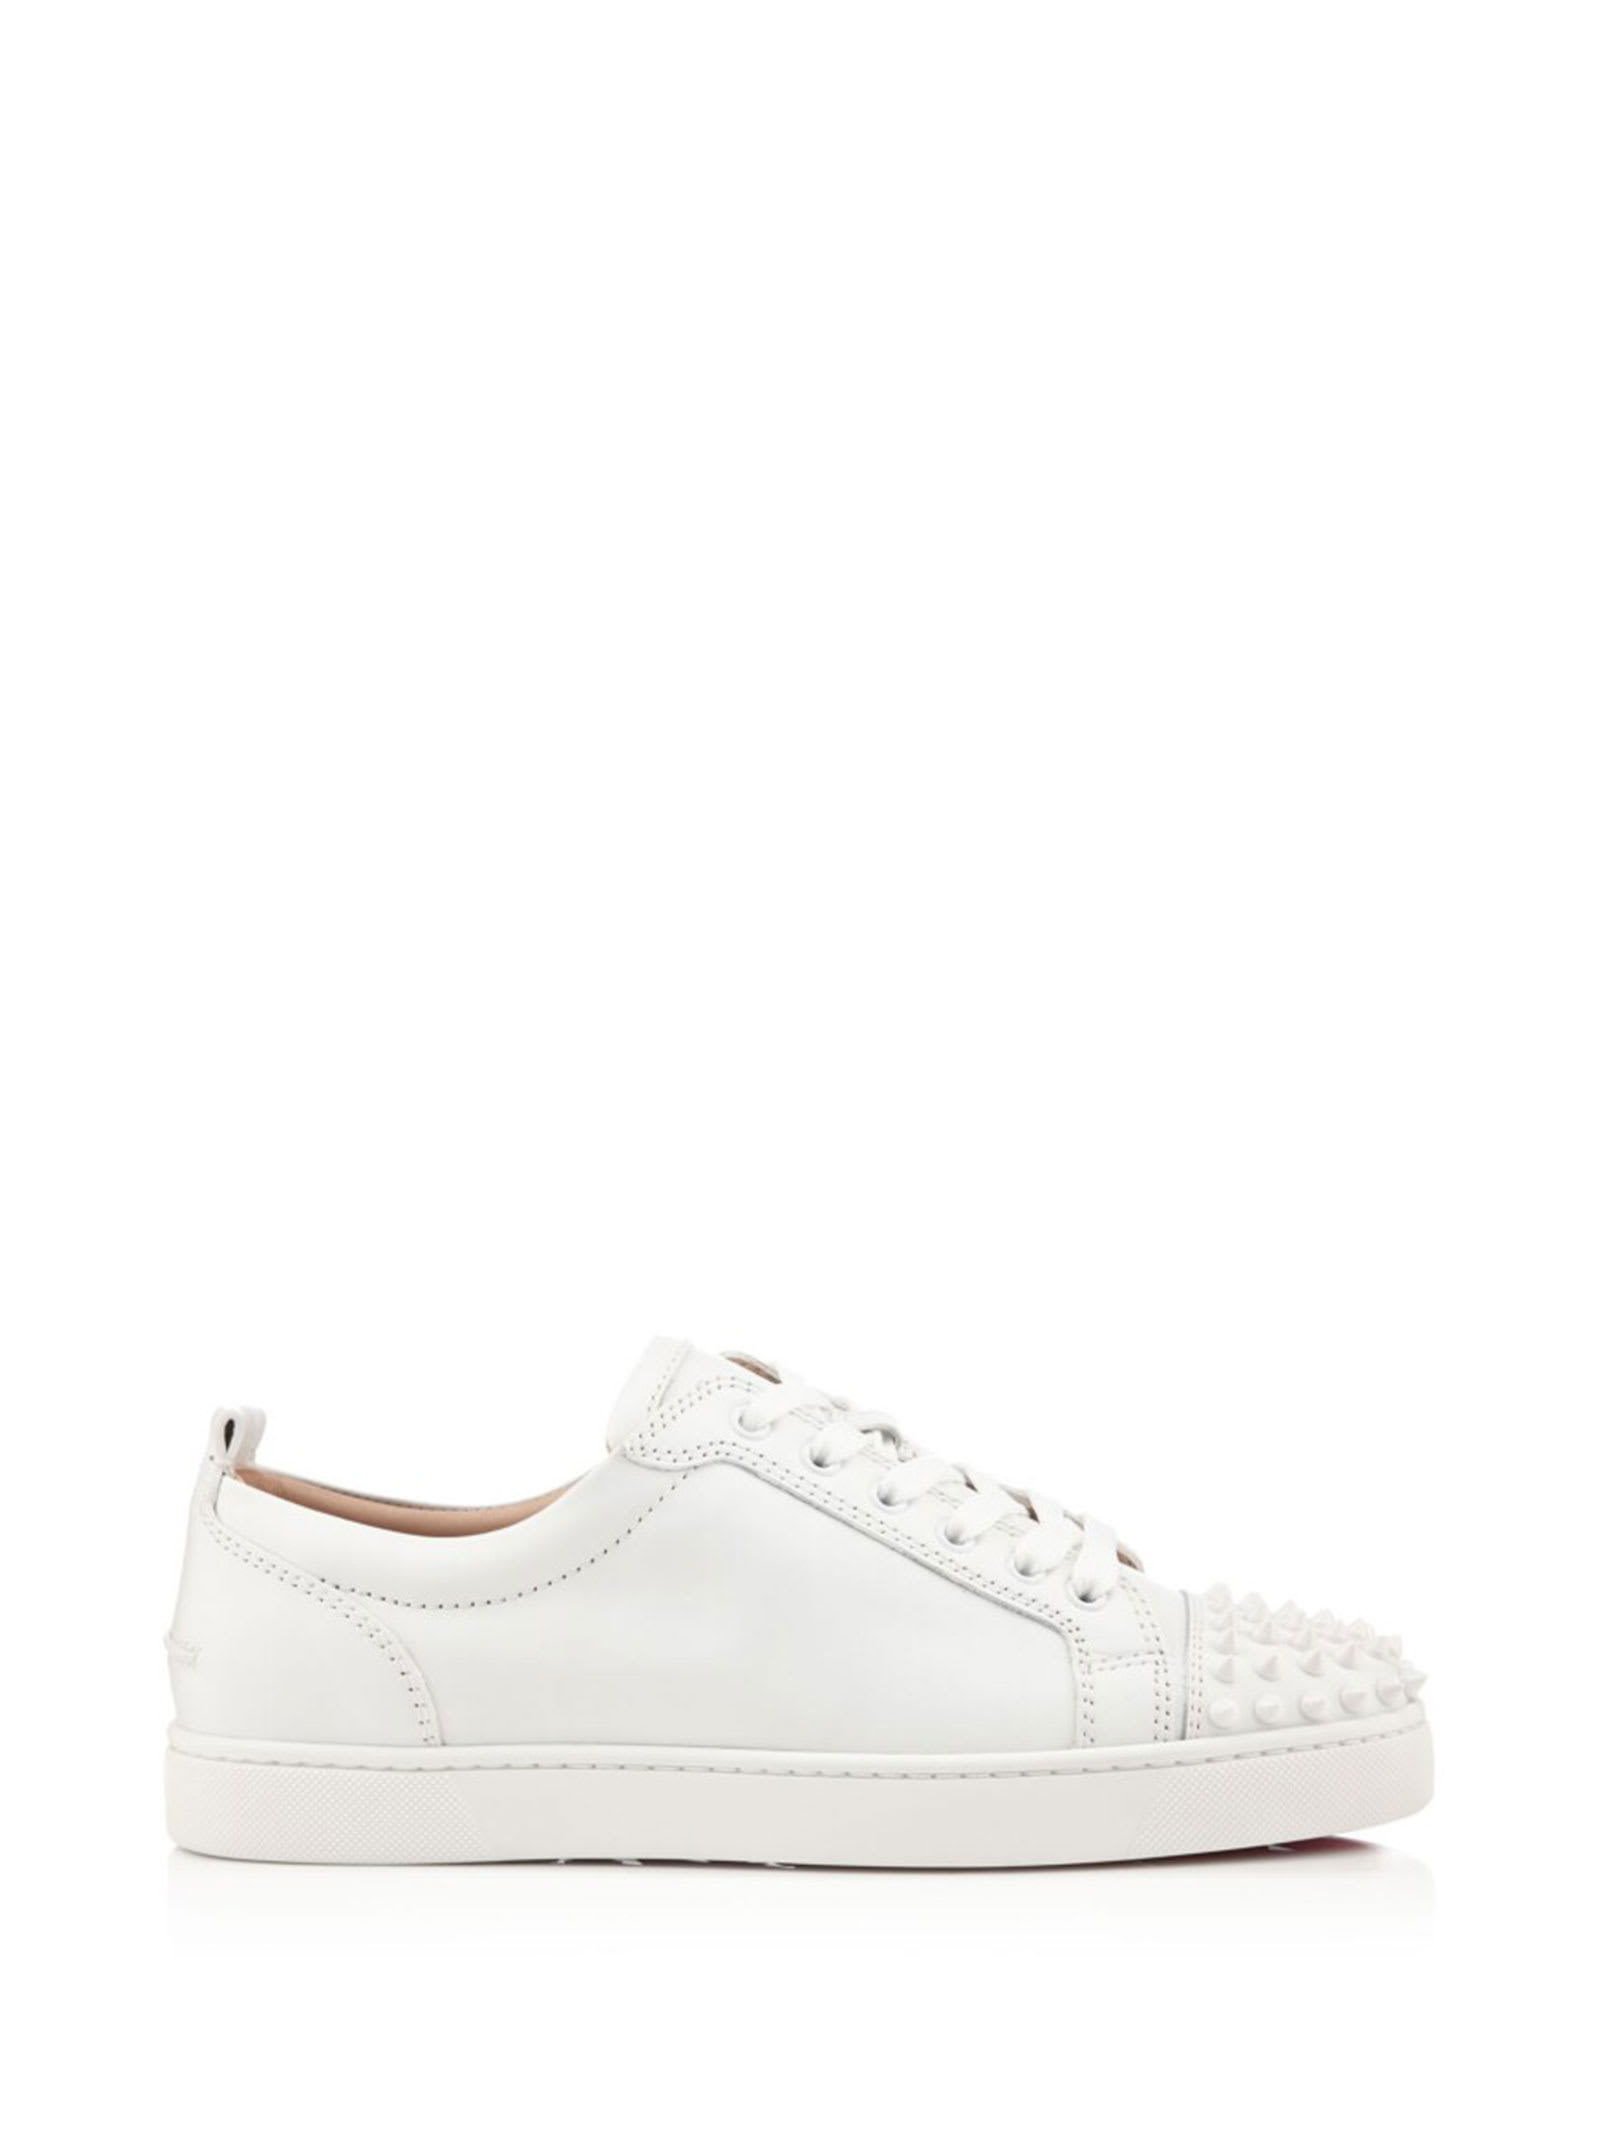 CHRISTIAN LOUBOUTIN SNEAKER LOUIS JUNIOR WITH SPIKES